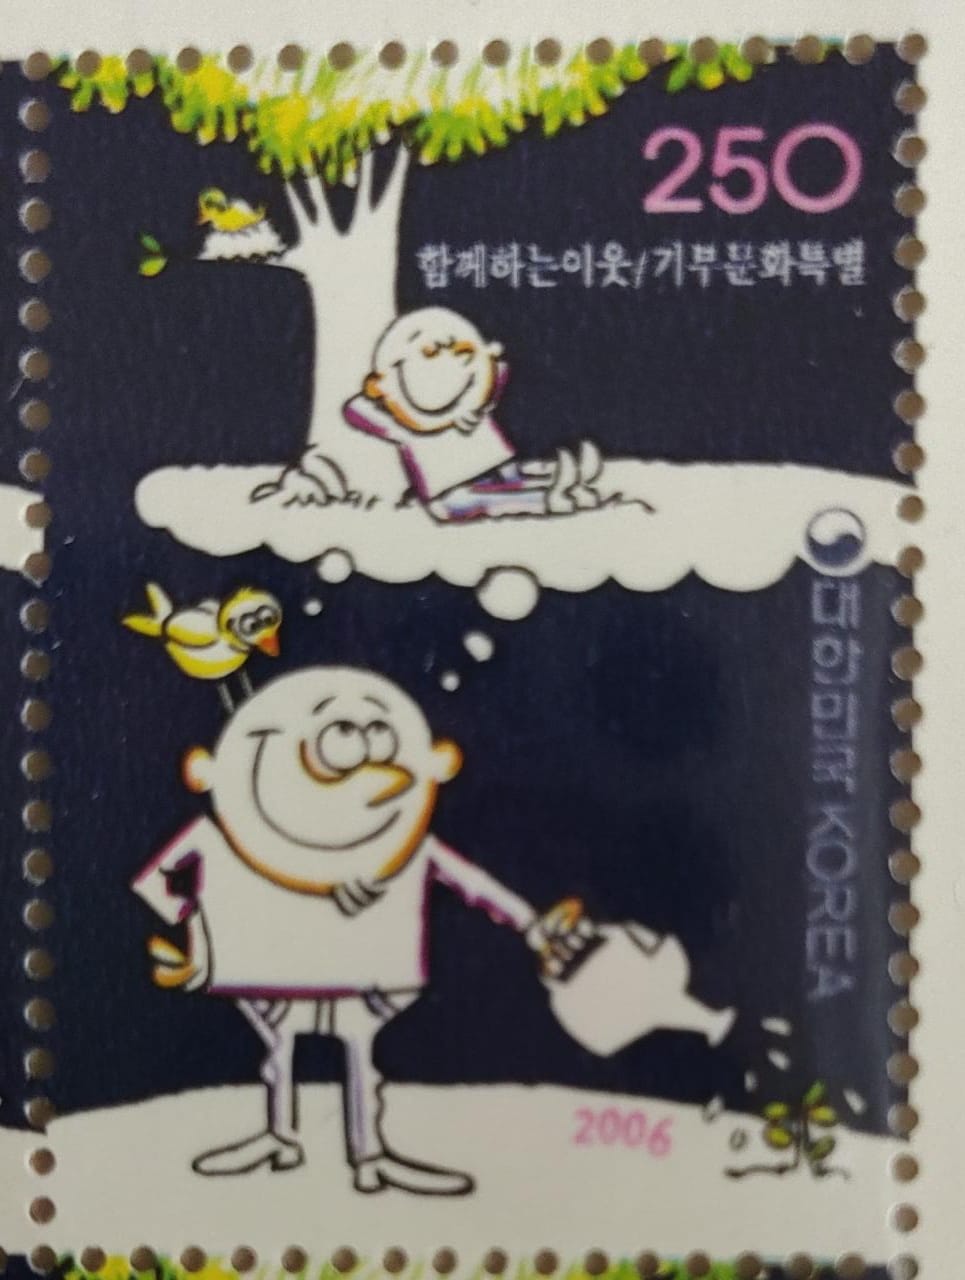 Korea 2006 stamp with scent of Pine.